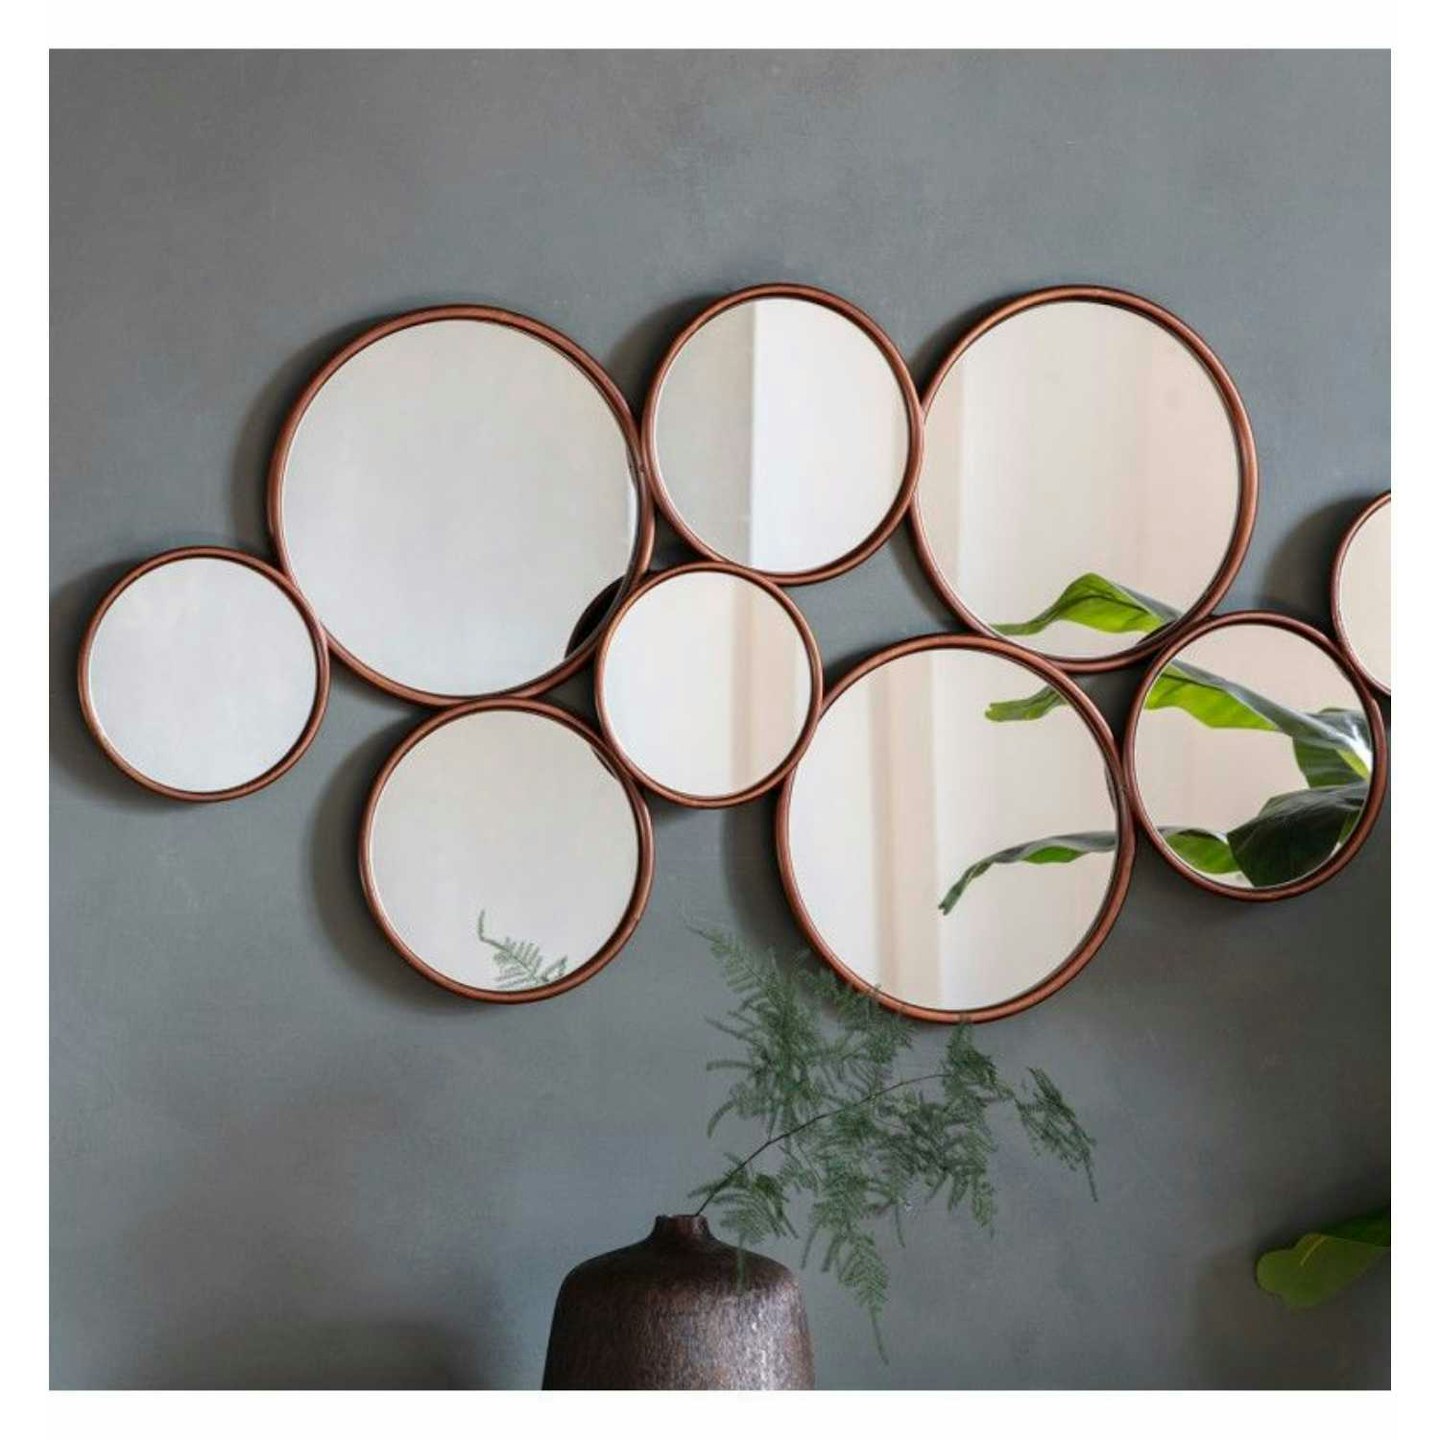 Contemporary Style Art Street Round Flat Decorative Wall Mirror With Copper Frame